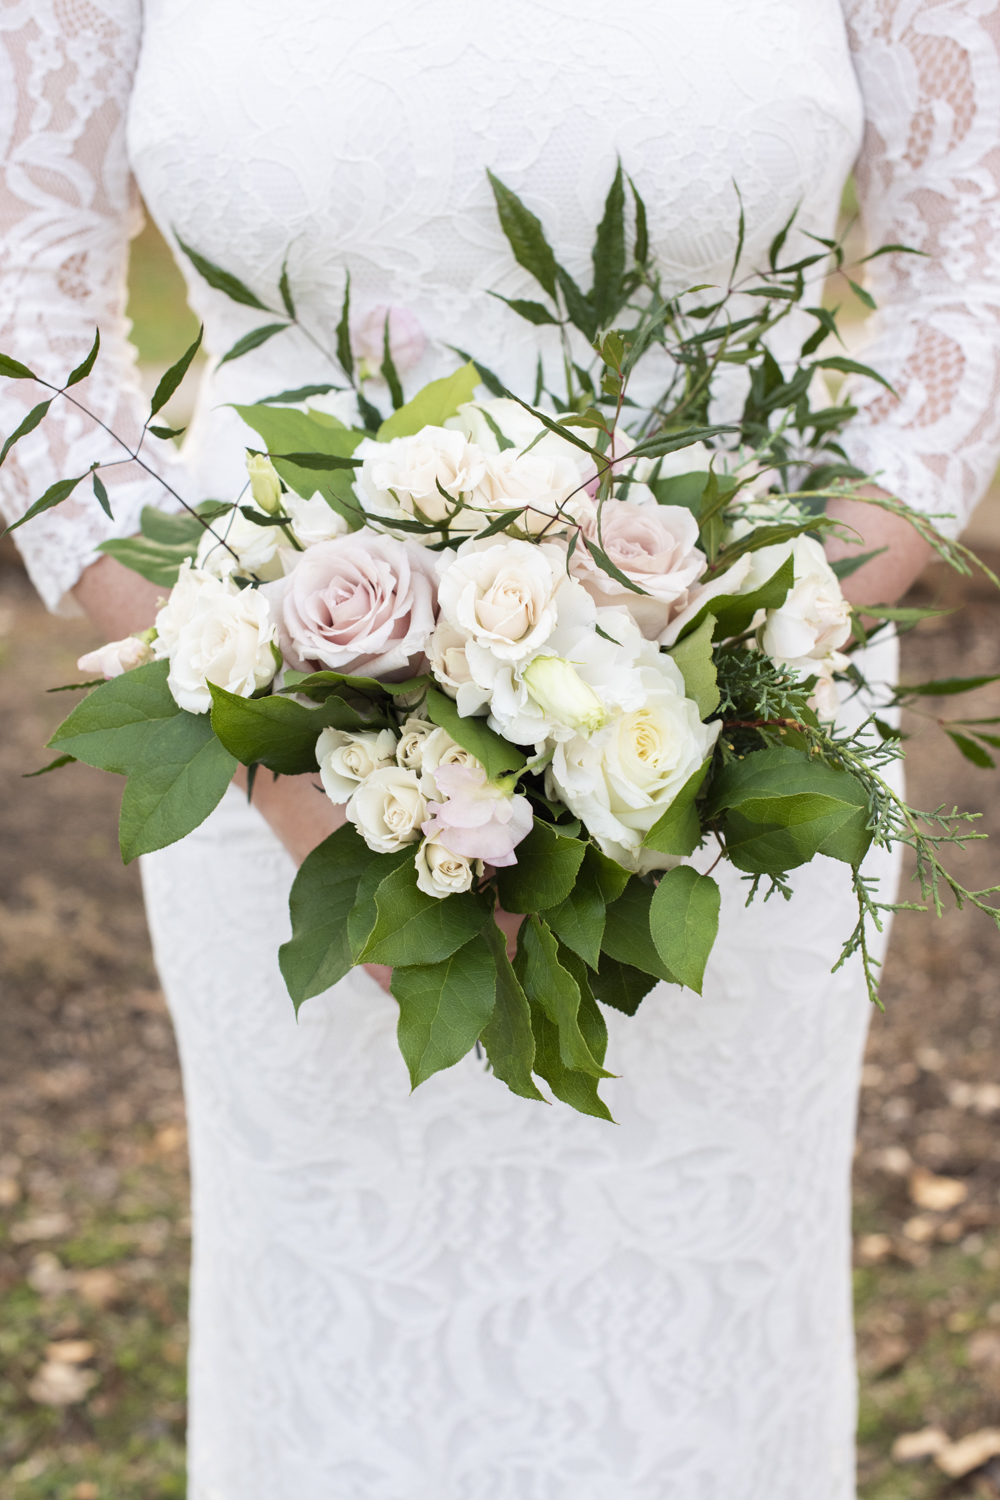 White and light pink rose bridal bouquet